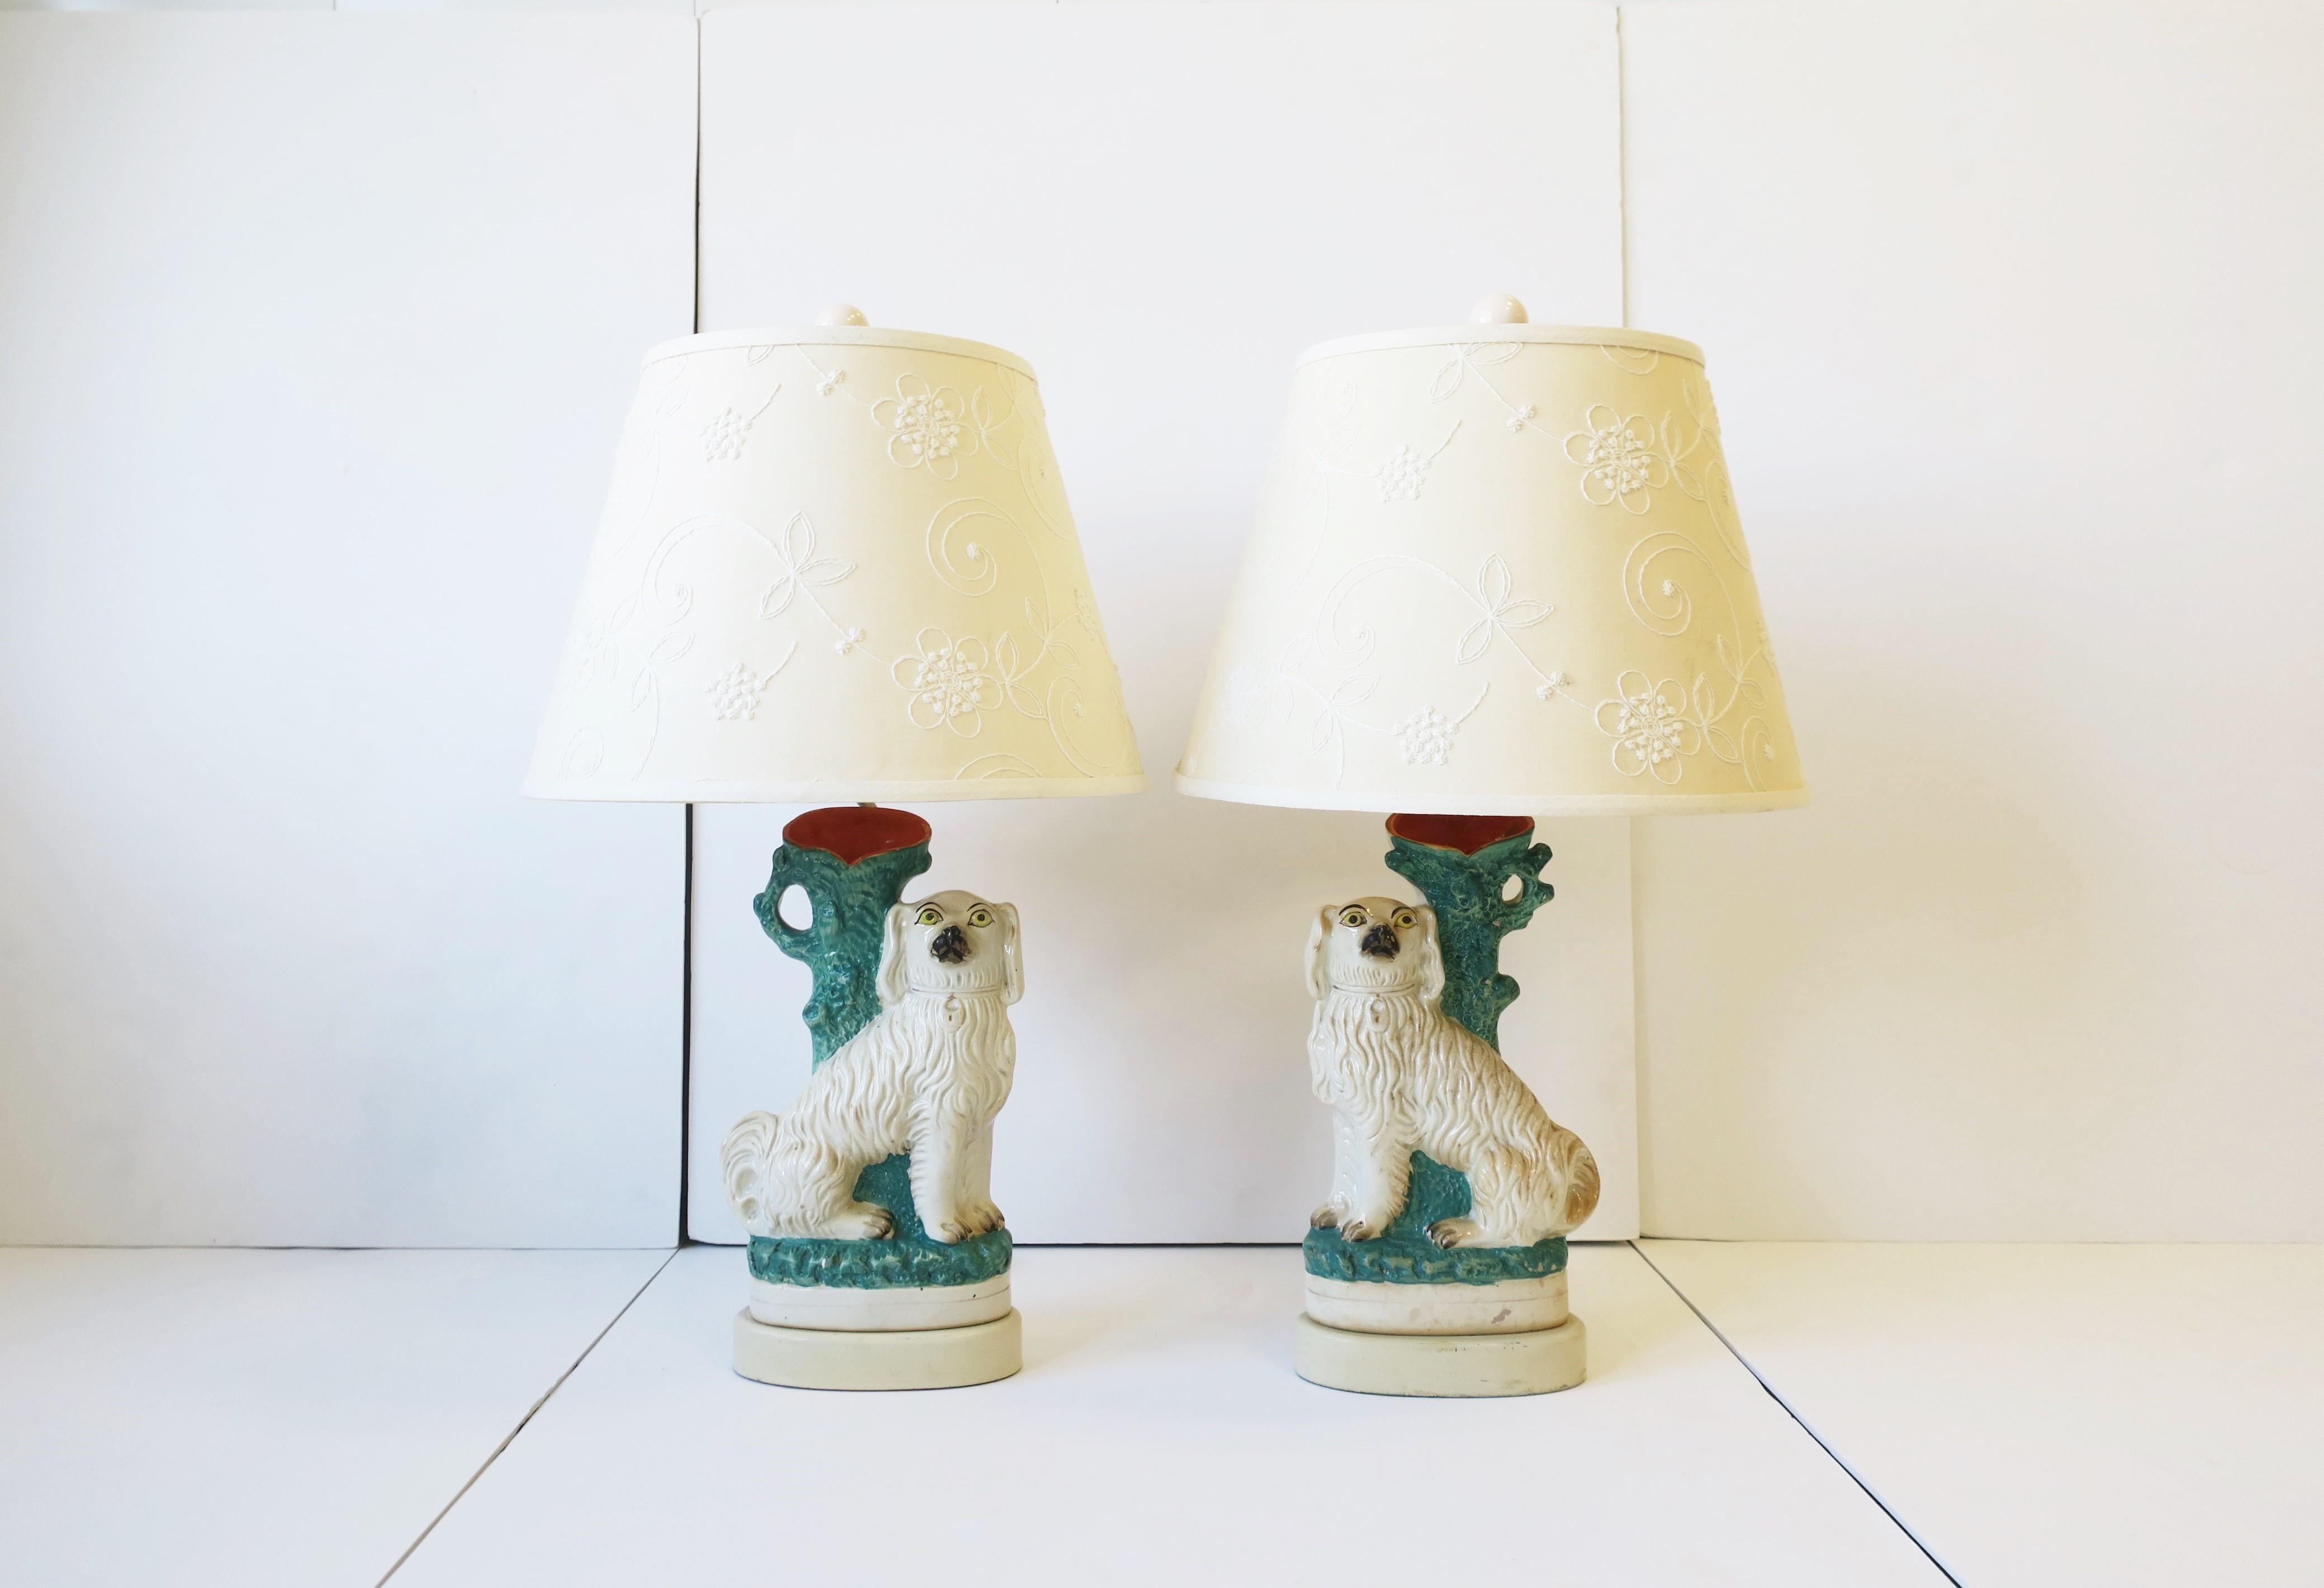 A rare pair of antique English Staffordshire dog and pottery spill vase lamps, circa mid to late-19th century, England. Each lamp represents a white dog with collar and locket, seated against a blue/green and orange spill vase 'tree'. The spill vase